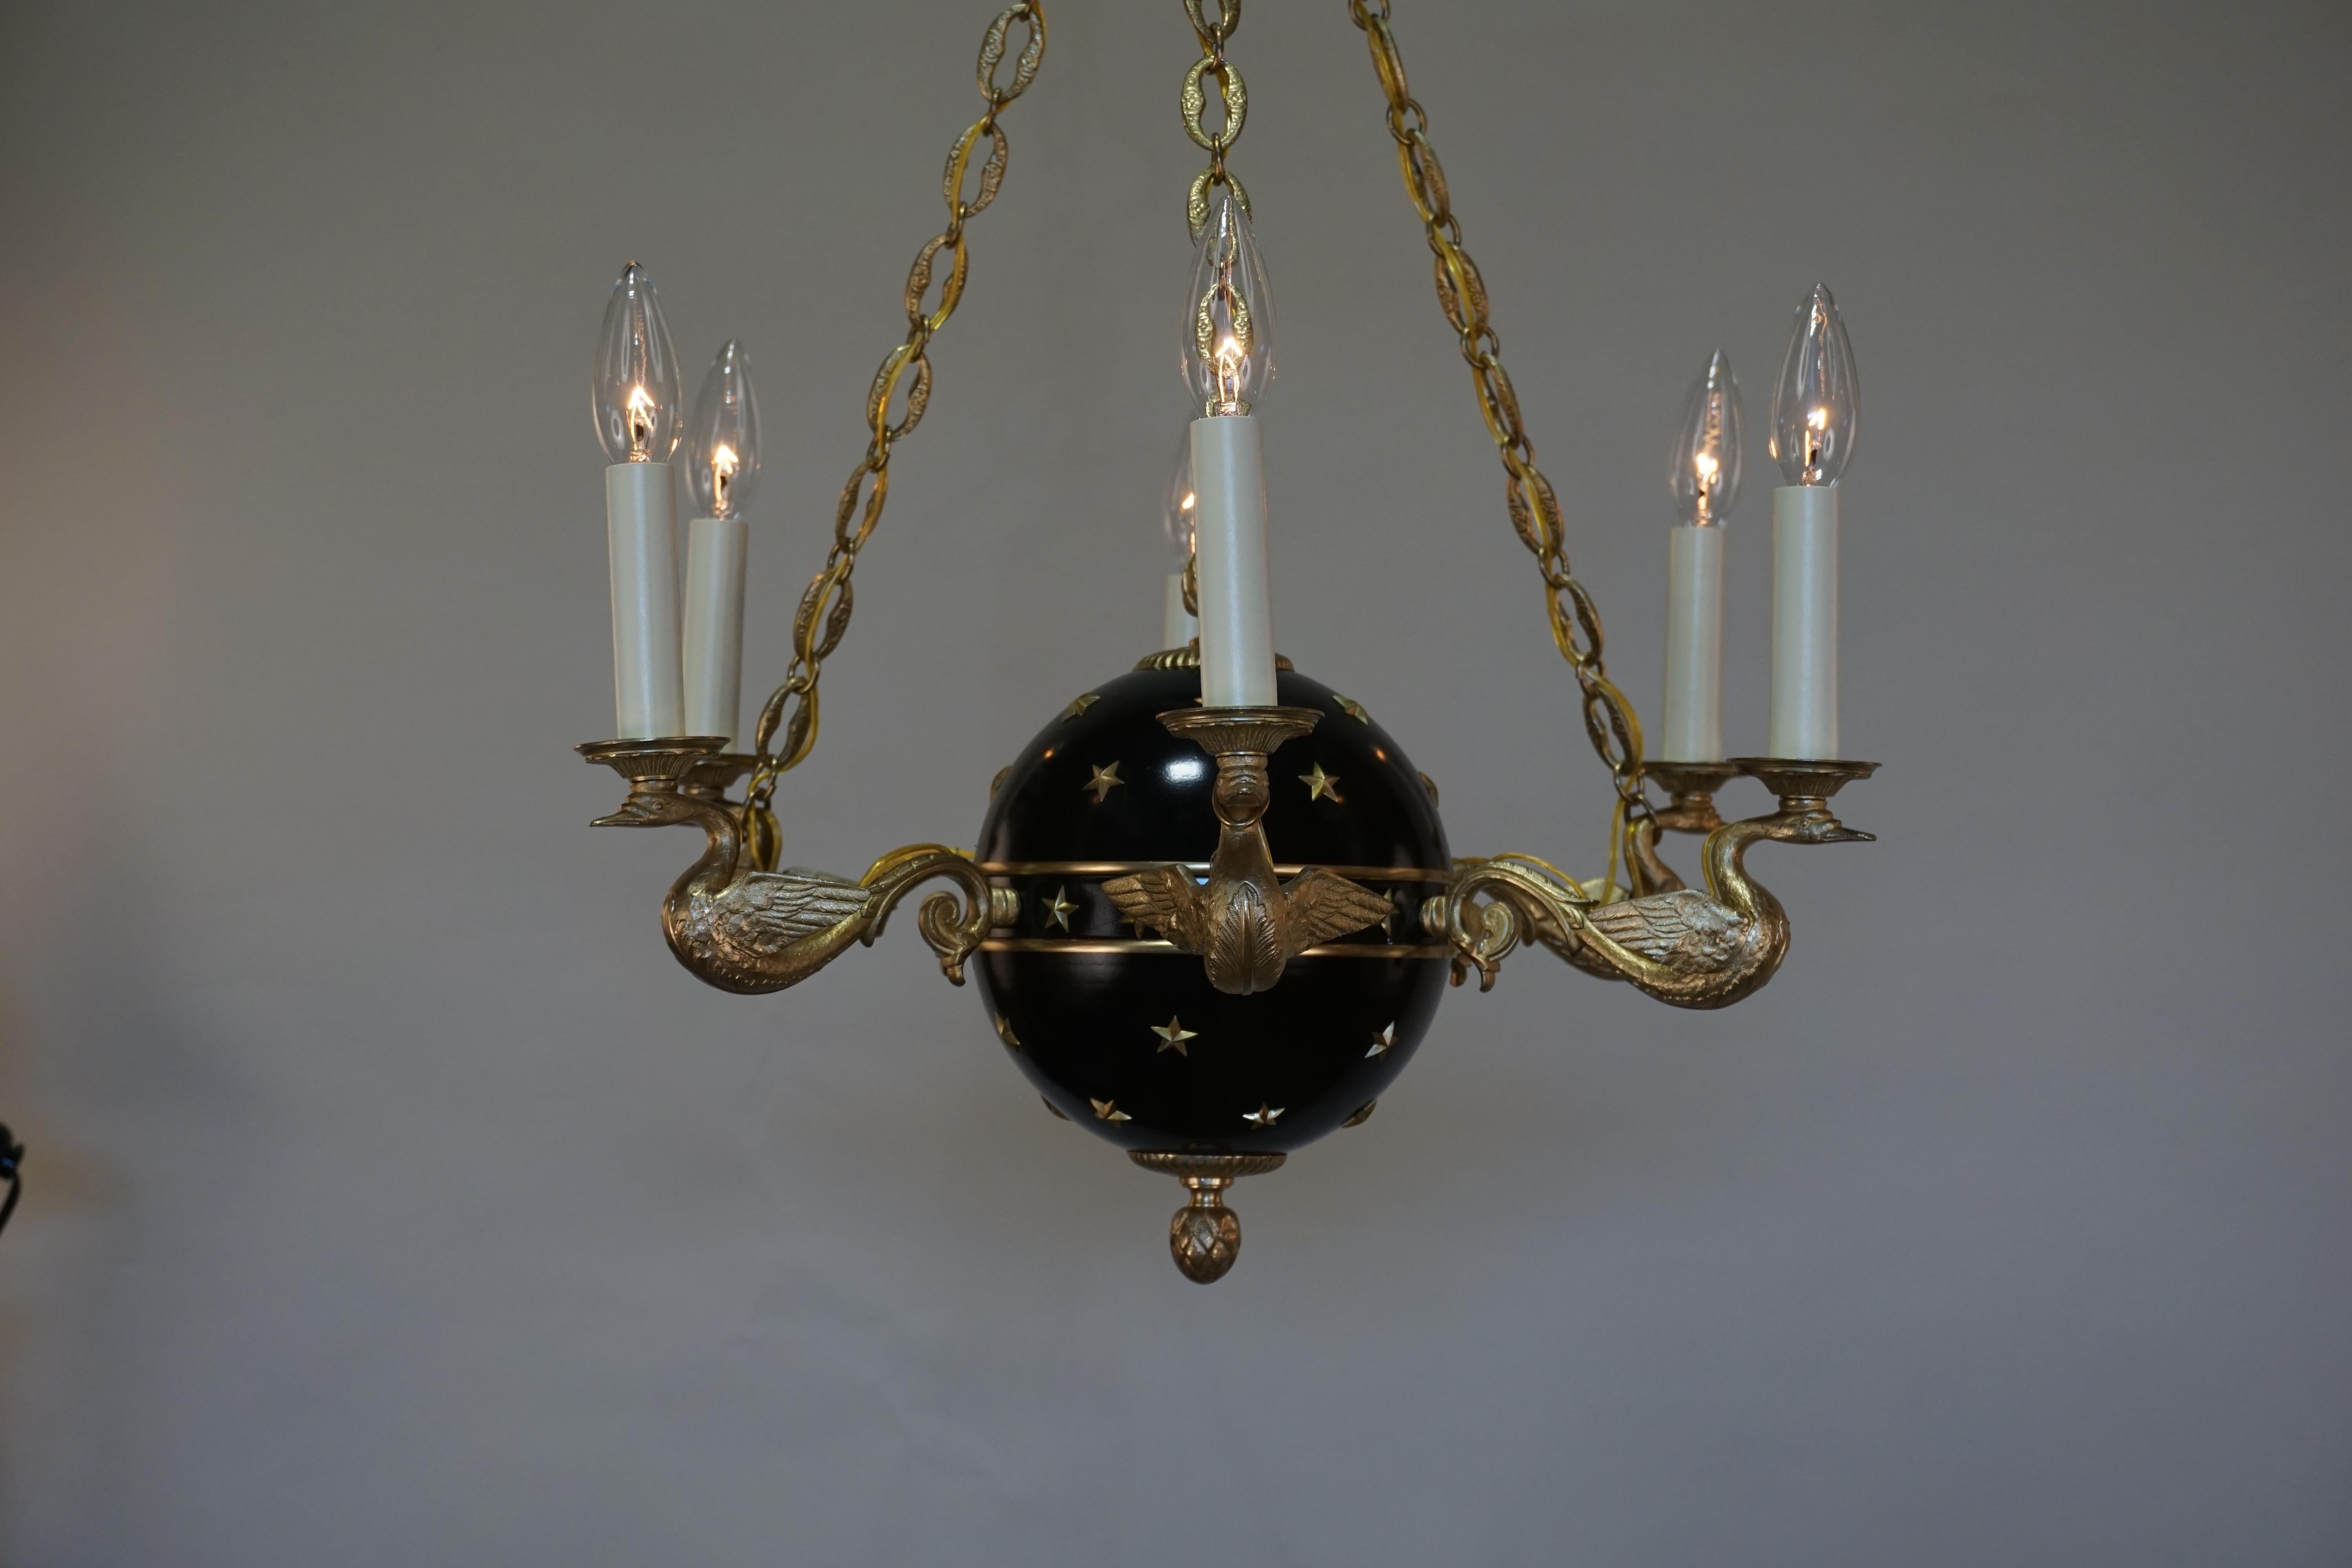 French bronze Empire style six-light chandelier.